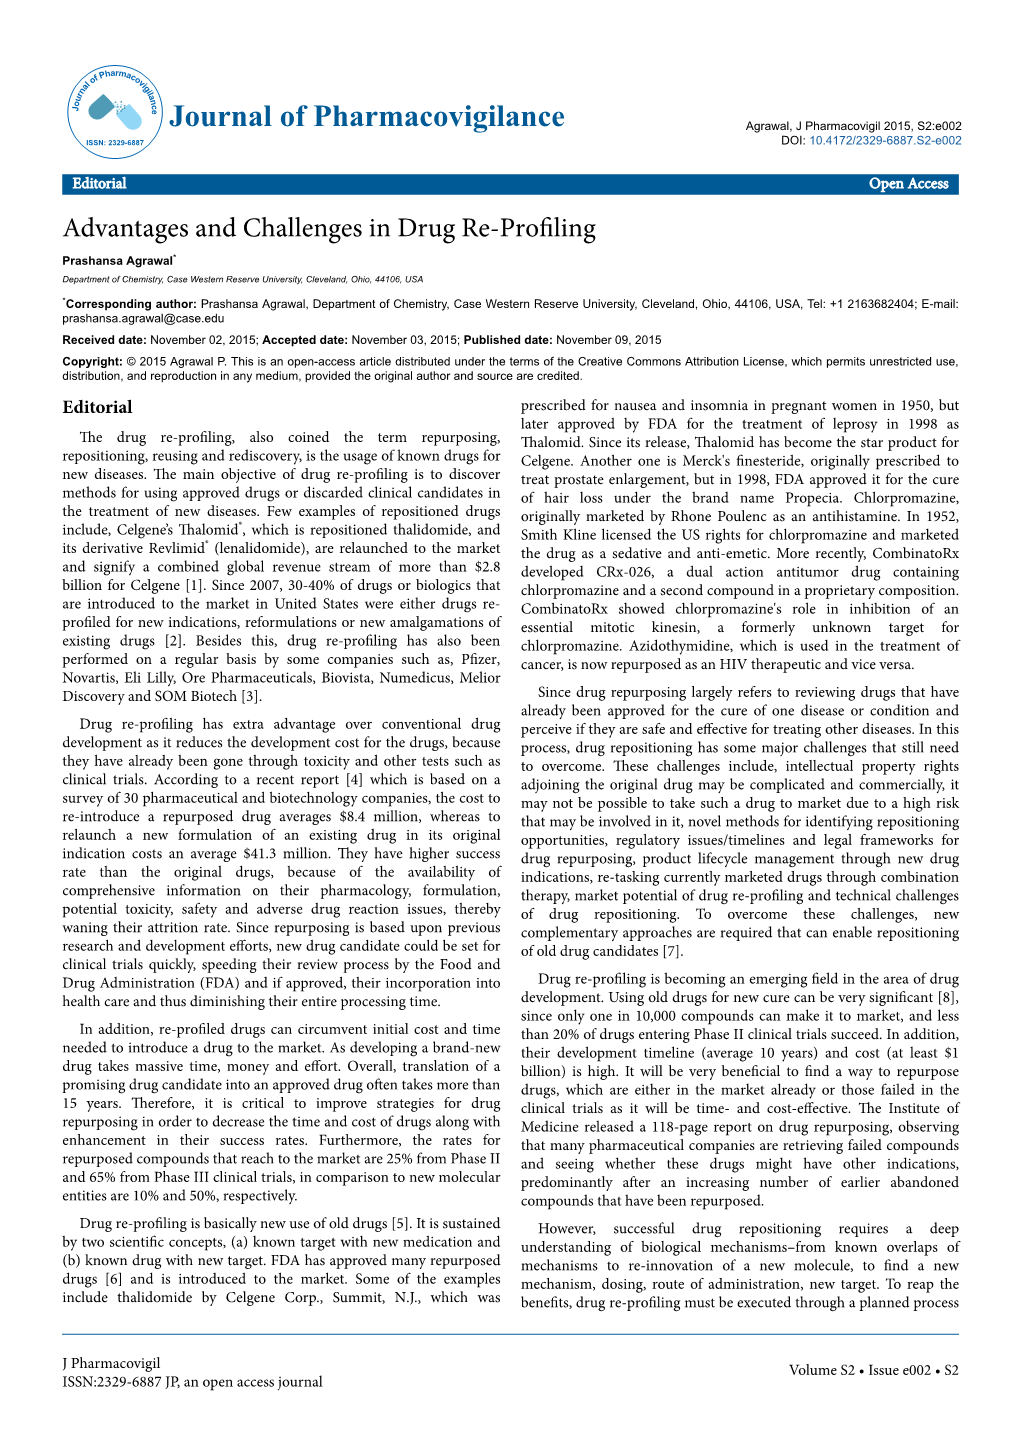 Advantages and Challenges in Drug Re-Profiling Prashansa Agrawal* Department of Chemistry, Case Western Reserve University, Cleveland, Ohio, 44106, USA